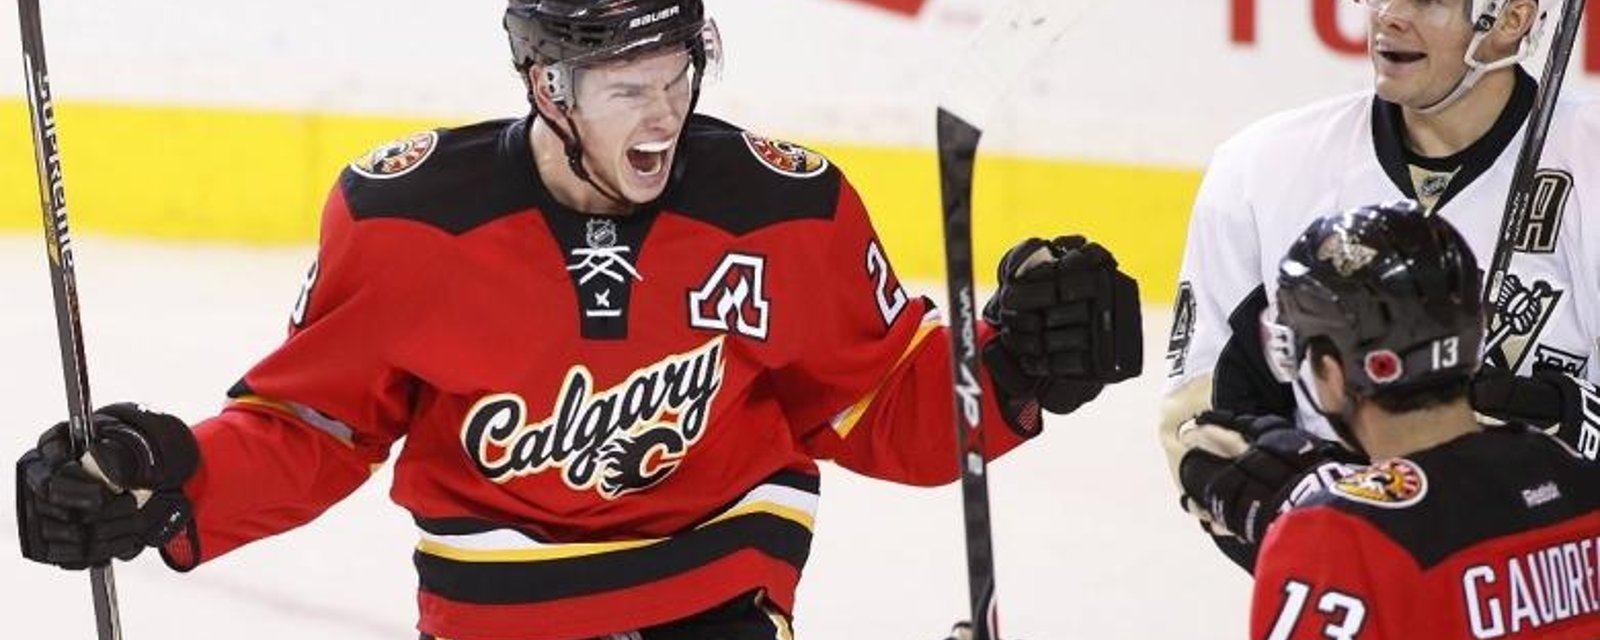 Flames GM guarantees he will get key free agents signed.